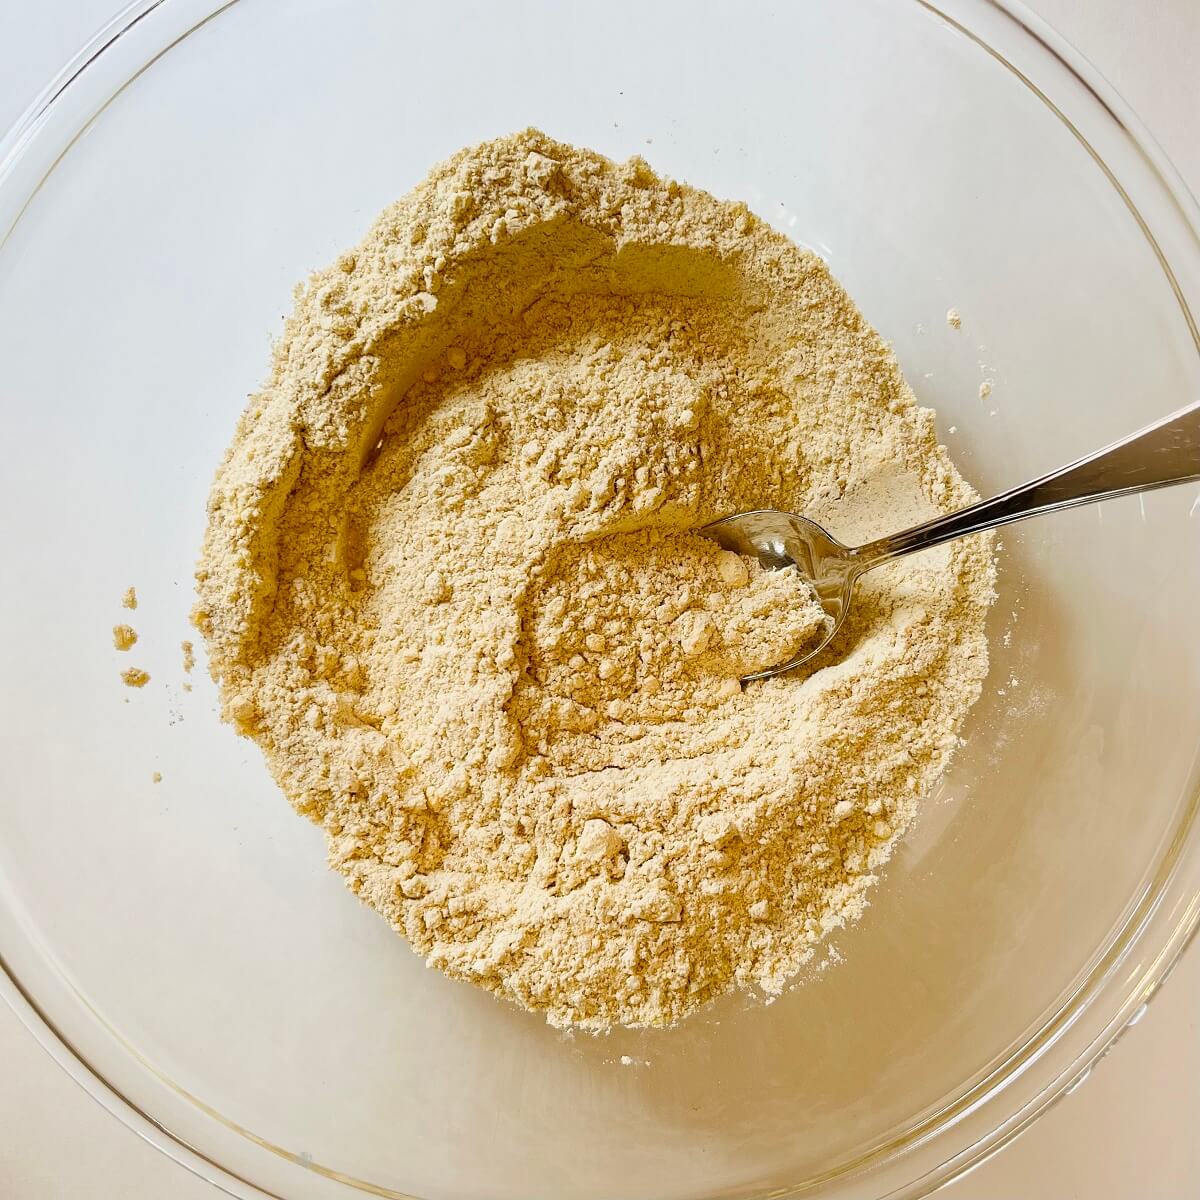 Dry ingredients for corn muffins mixed together in a glass bowl.